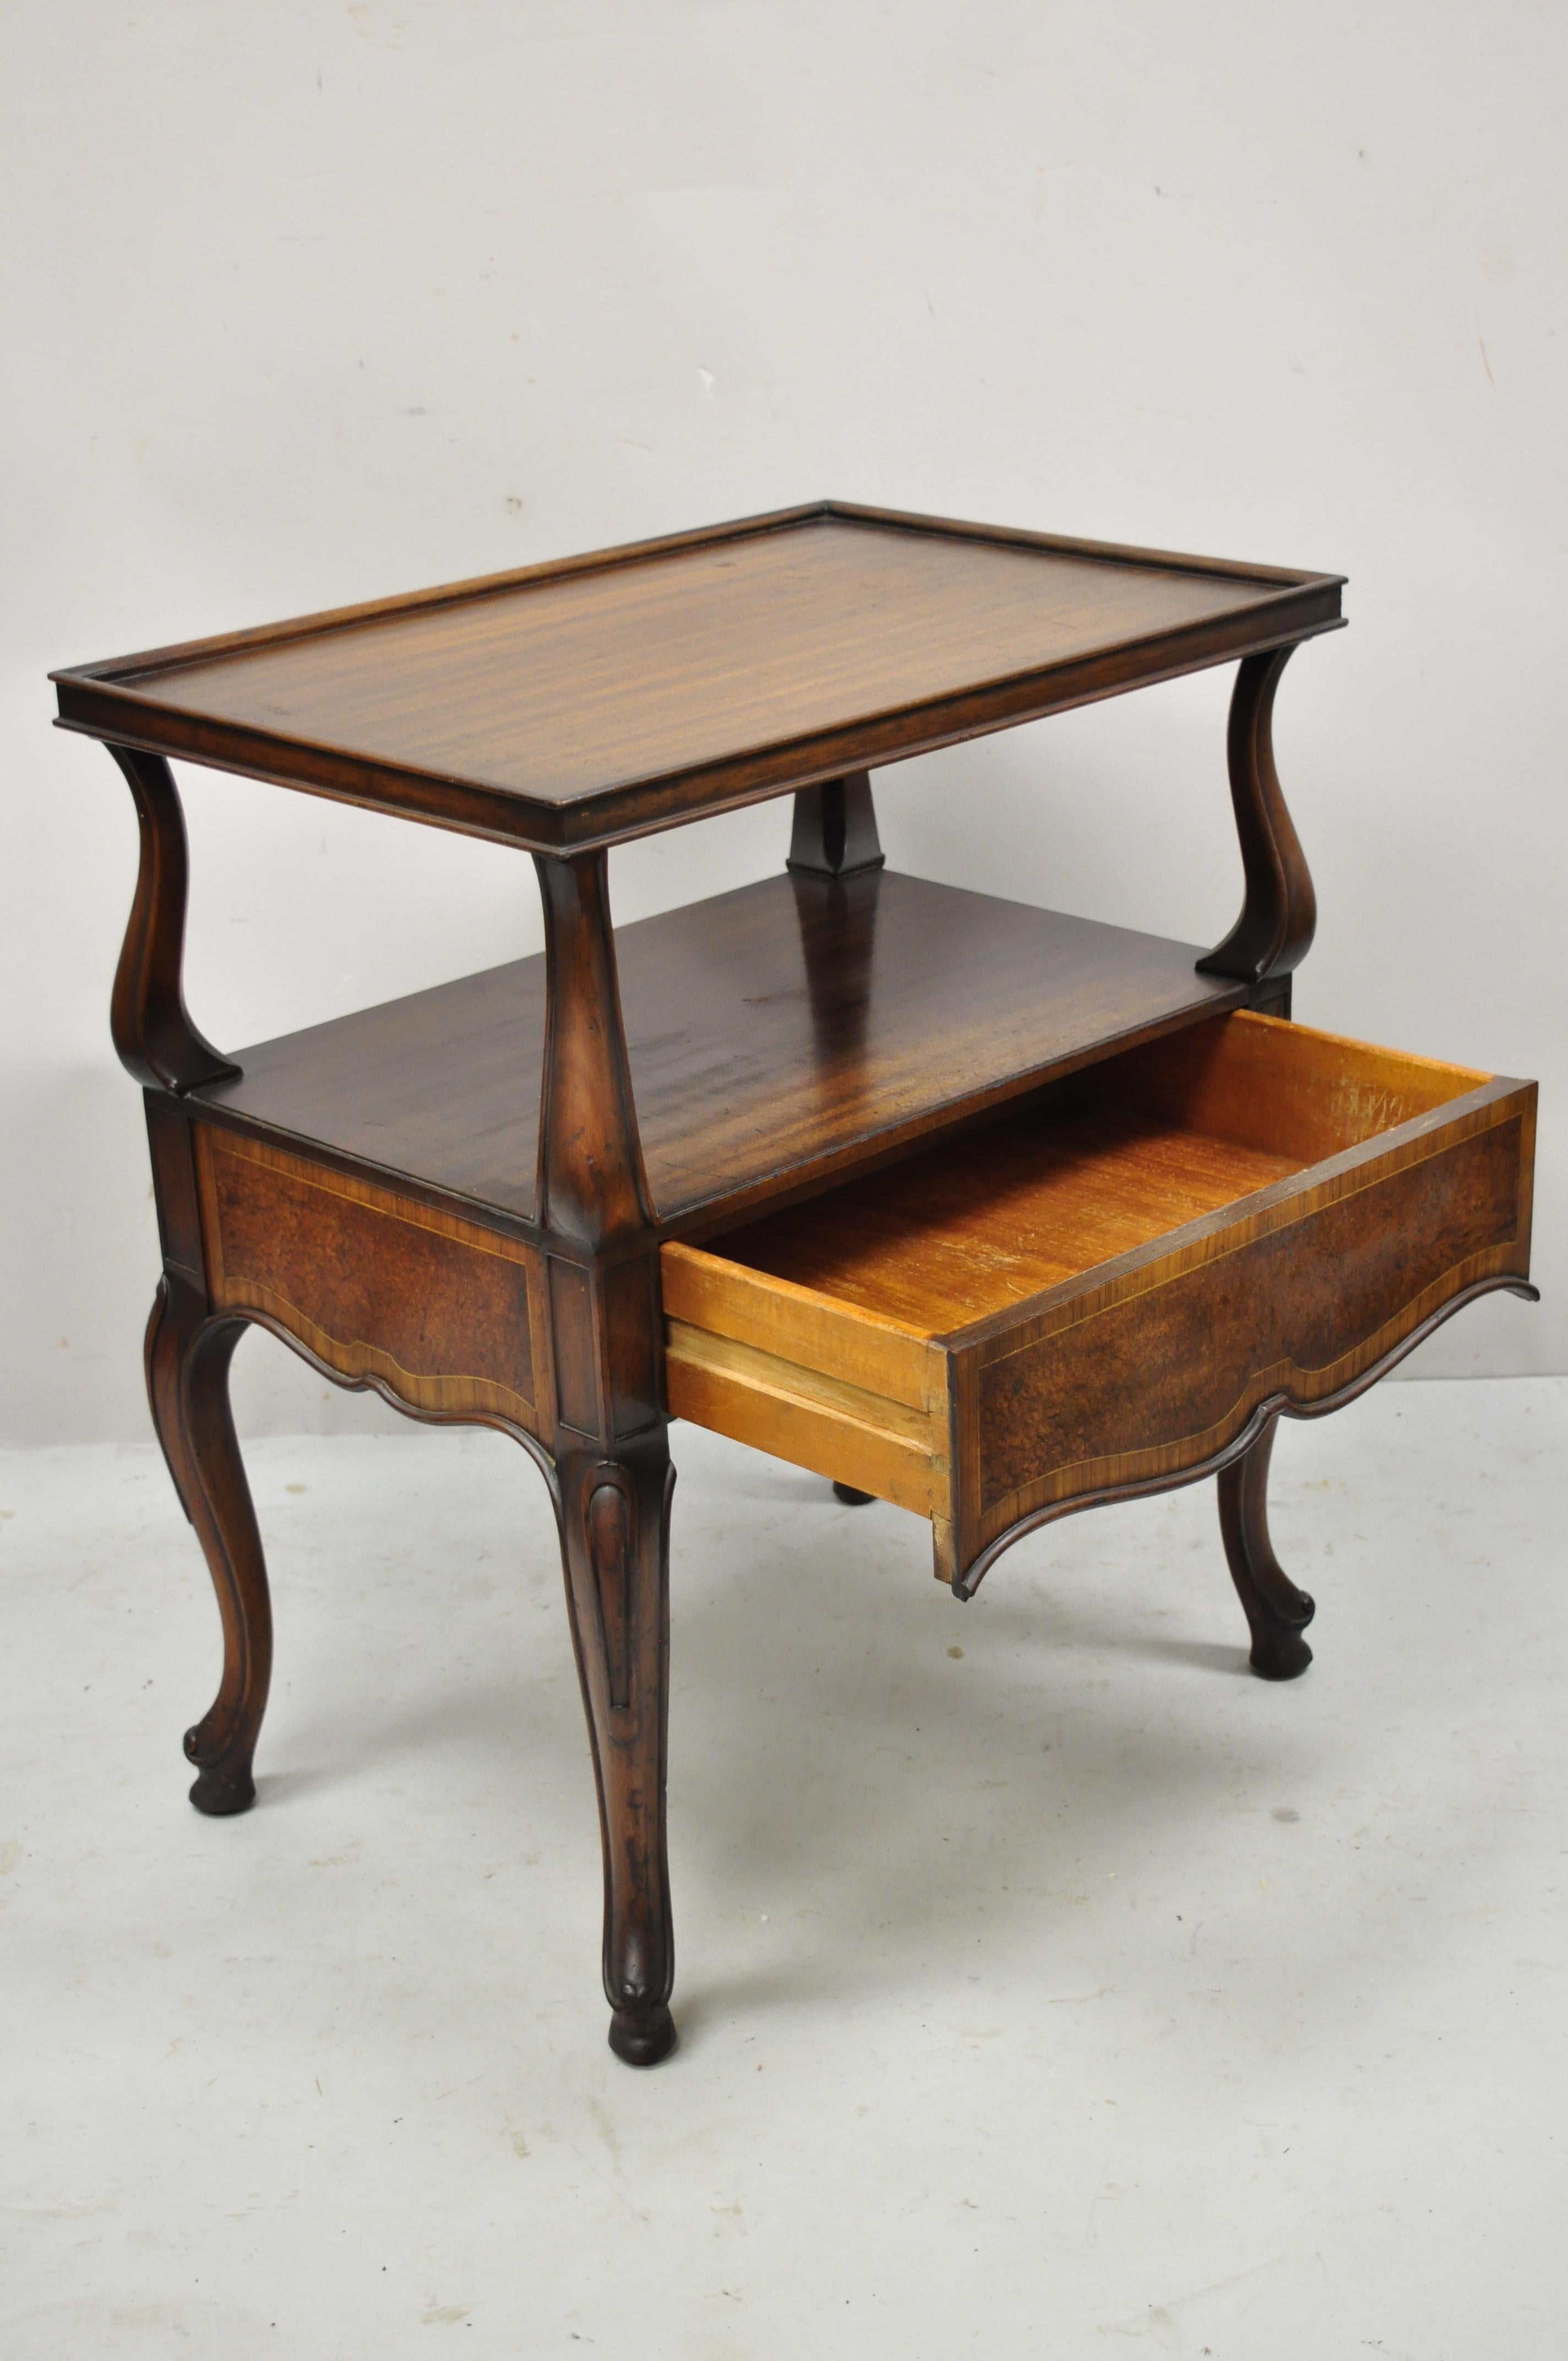 Vintage French Regency banded walnut one drawer lamp table end side table. Item features banded front and sides, beautiful wood grain, finished back, 1 dovetailed drawer, cabriole legs, very nice vintage item, great style and form. Circa Early to